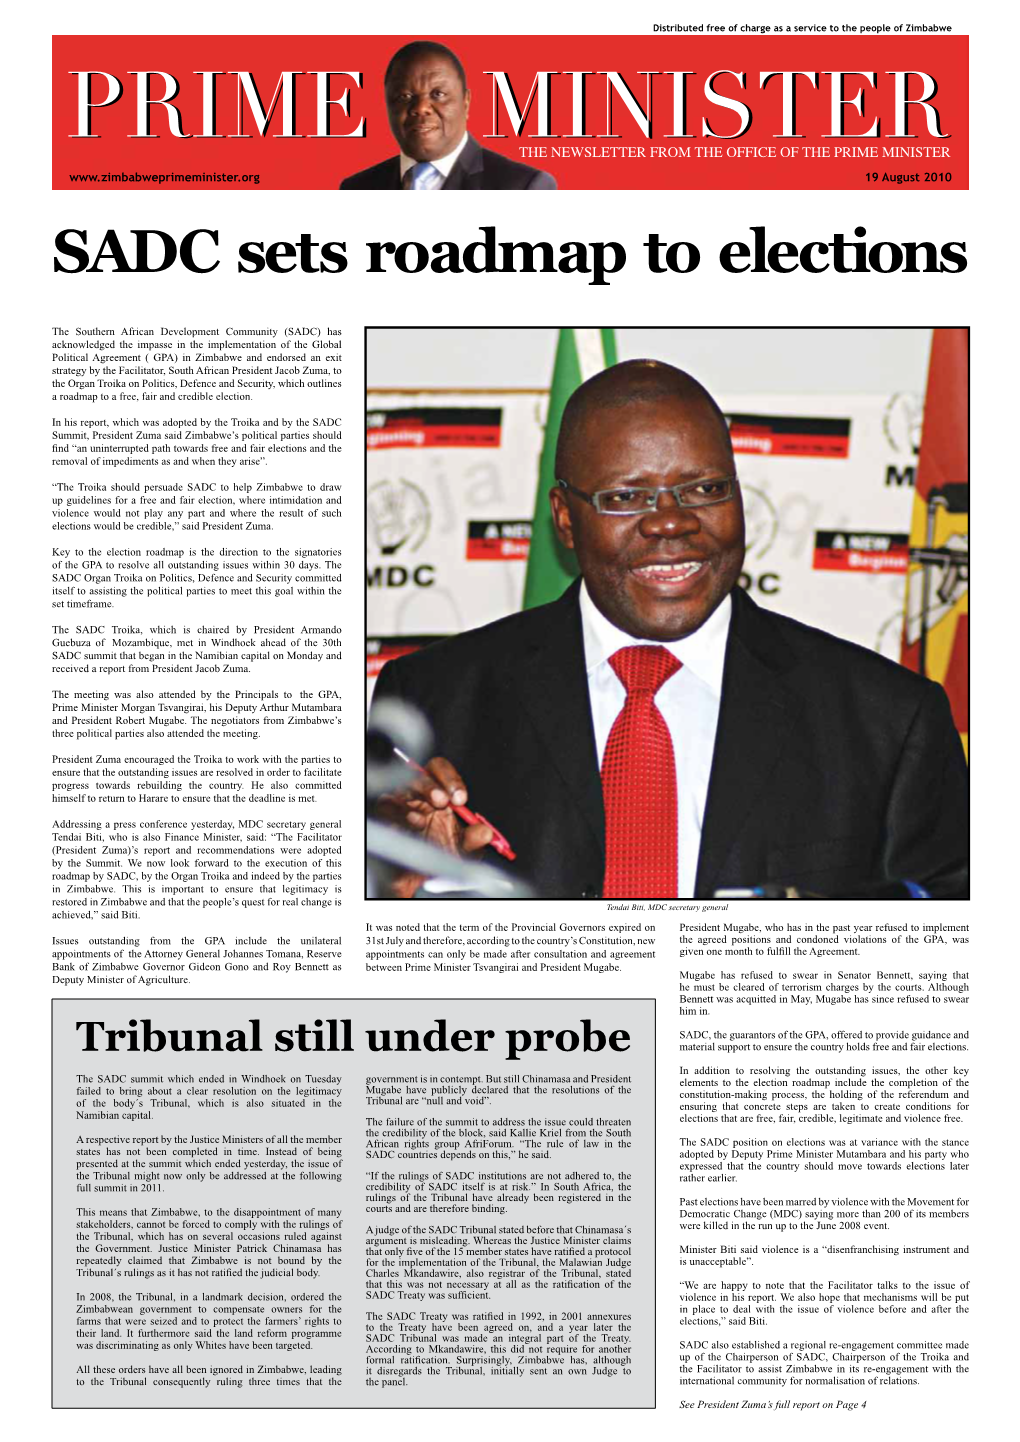 SADC Sets Roadmap to Elections